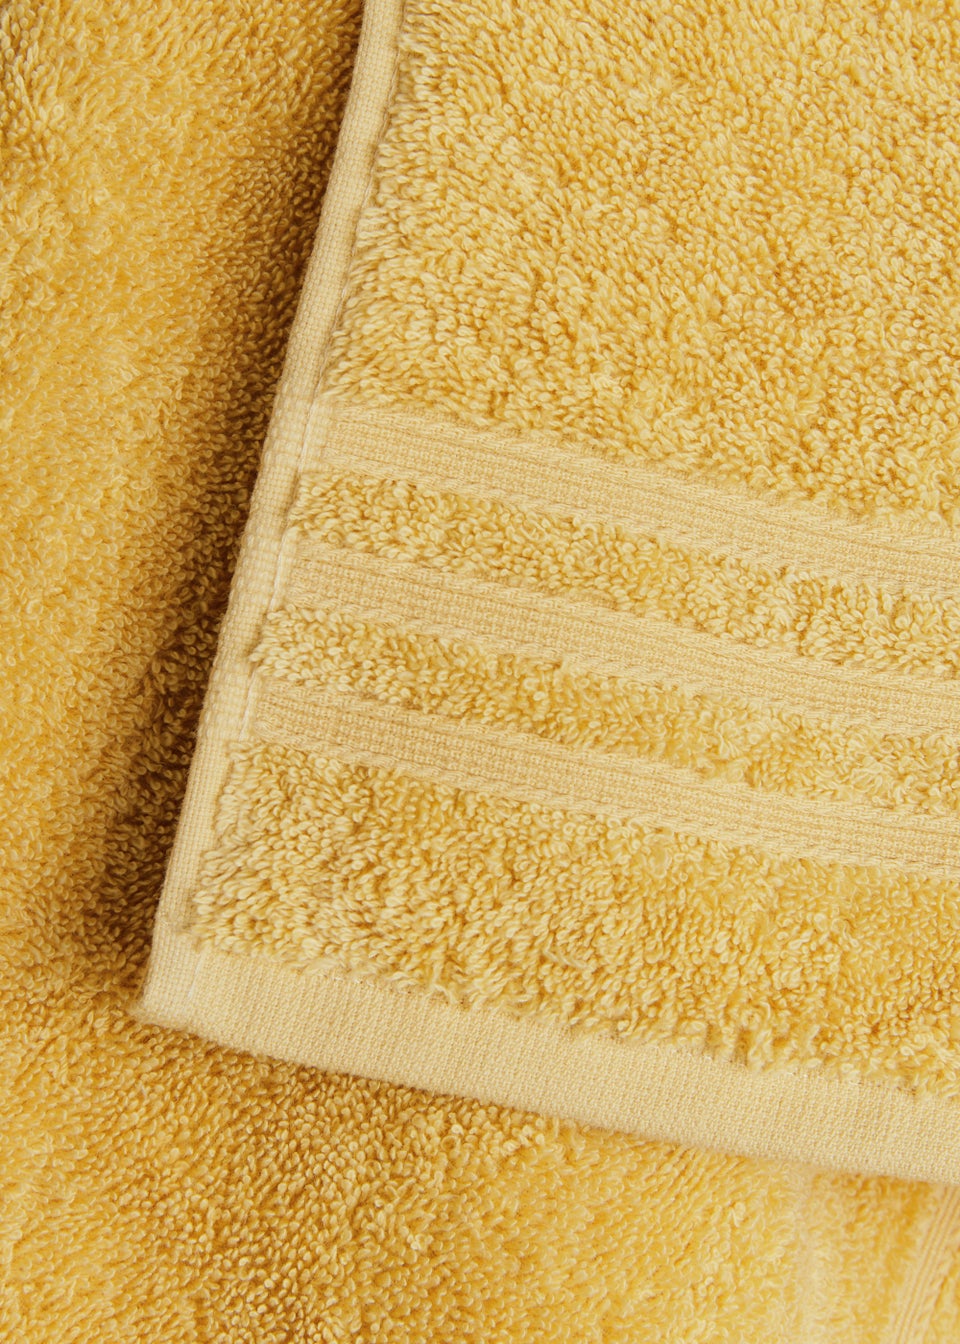 Yellow 100% Egyptian Cotton Towels